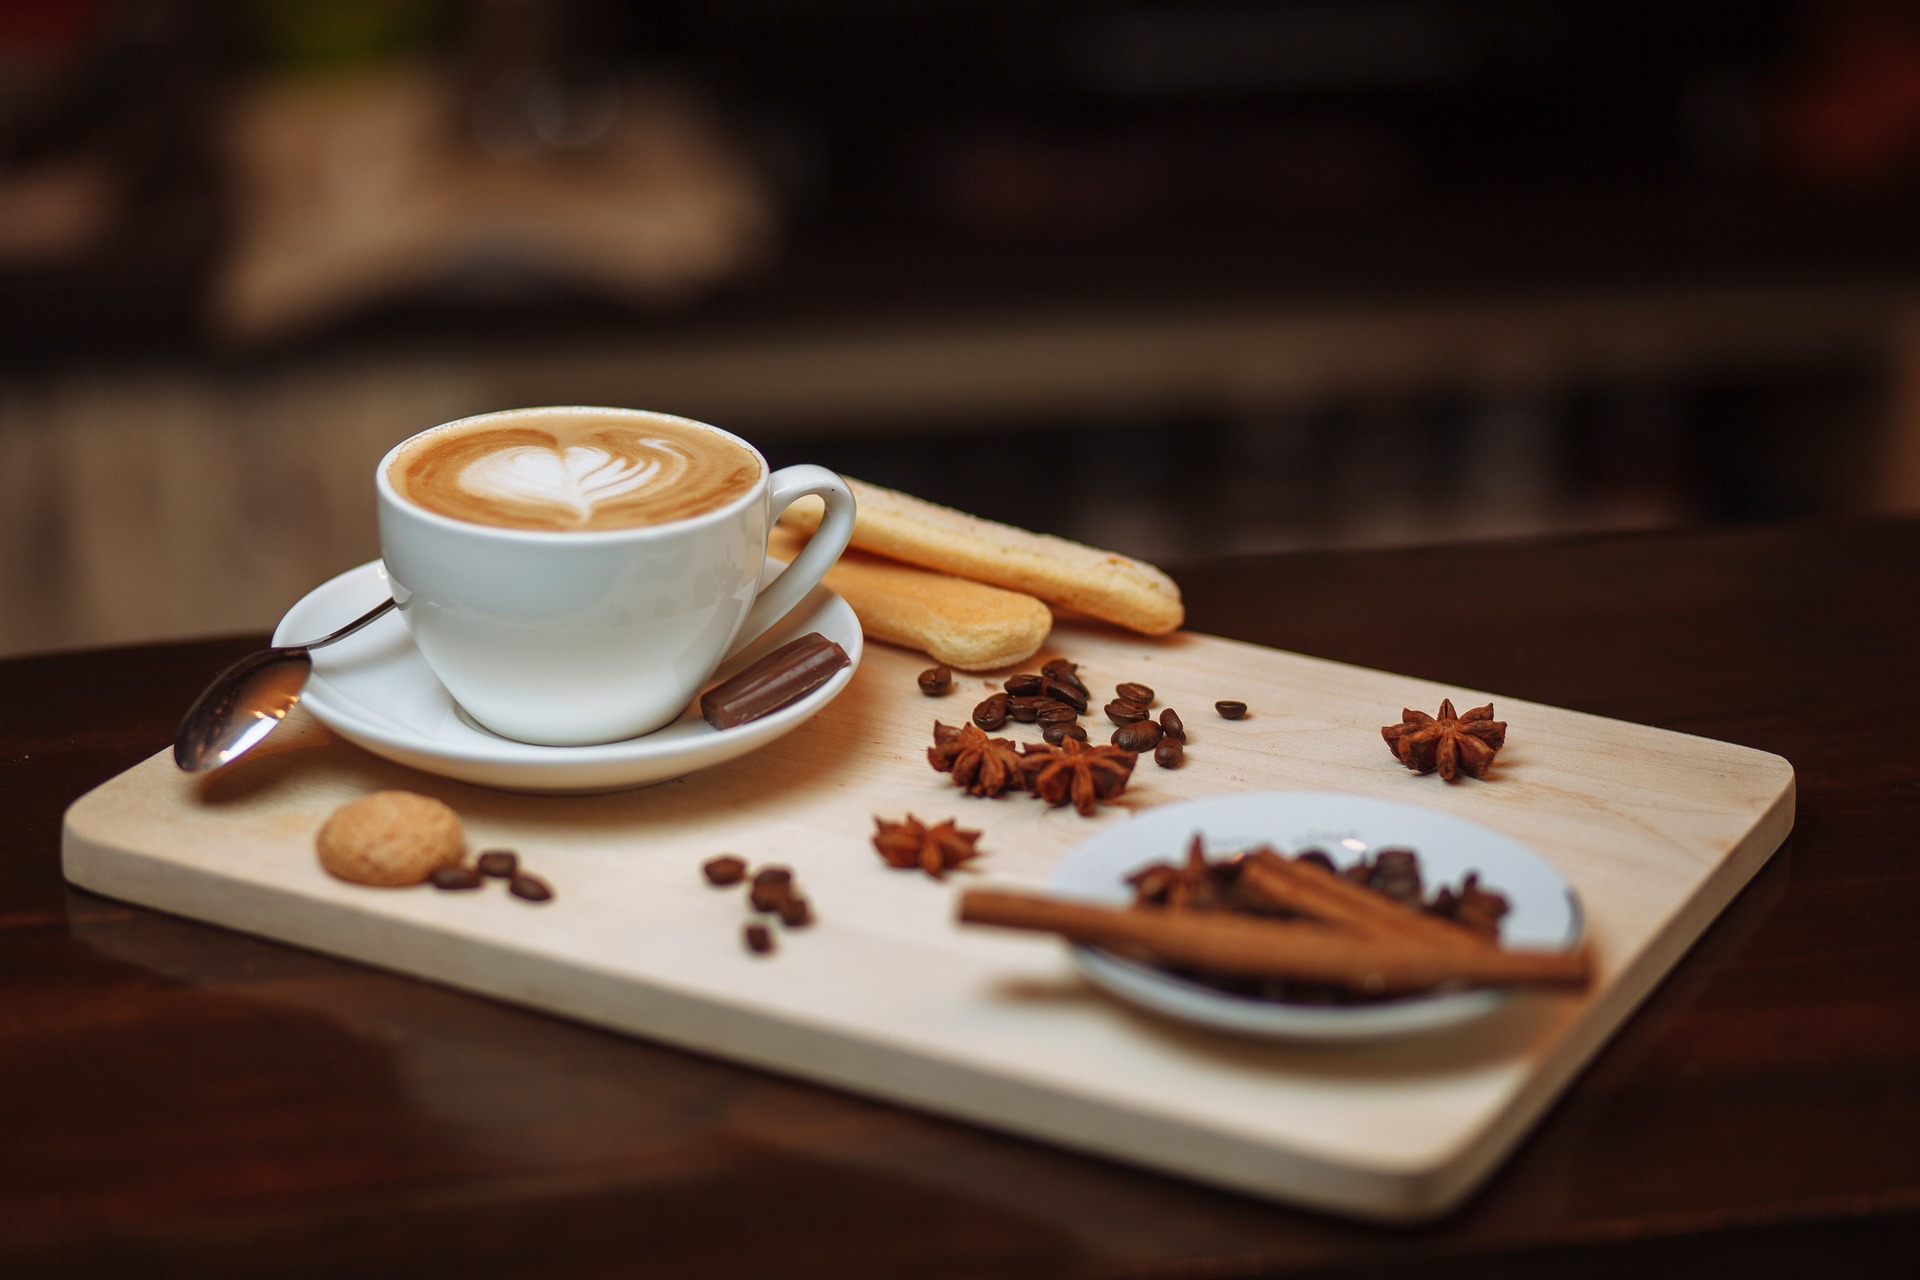 A luxurious assortment of high-quality coffee ingredients spread out on a wooden board